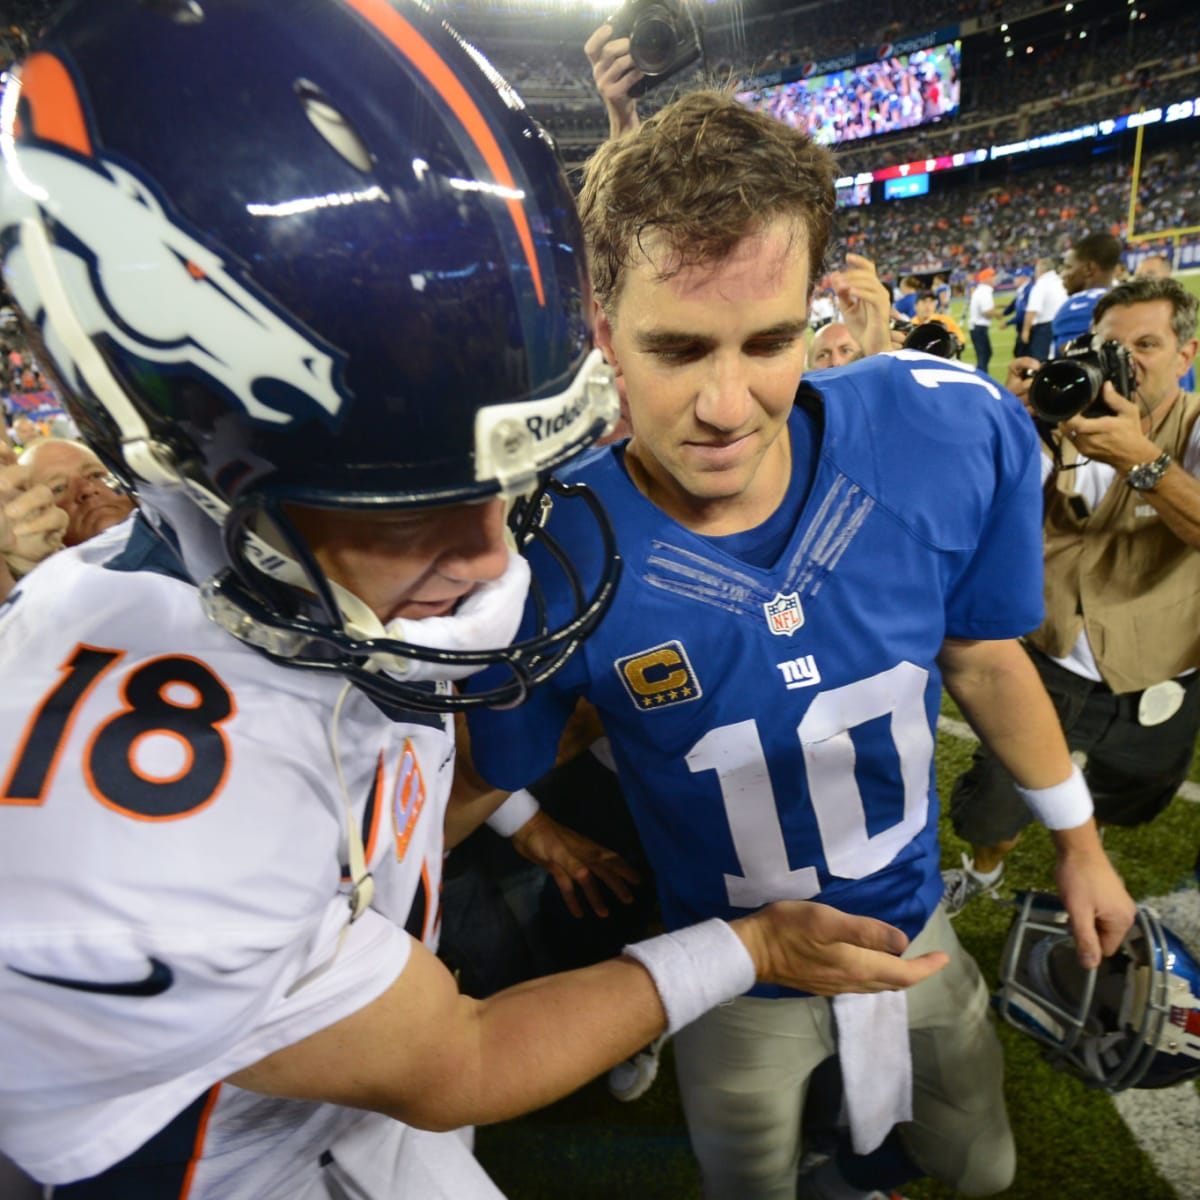 Peyton and Eli Manning skipping Bears-Steelers on ESPN's 'Monday